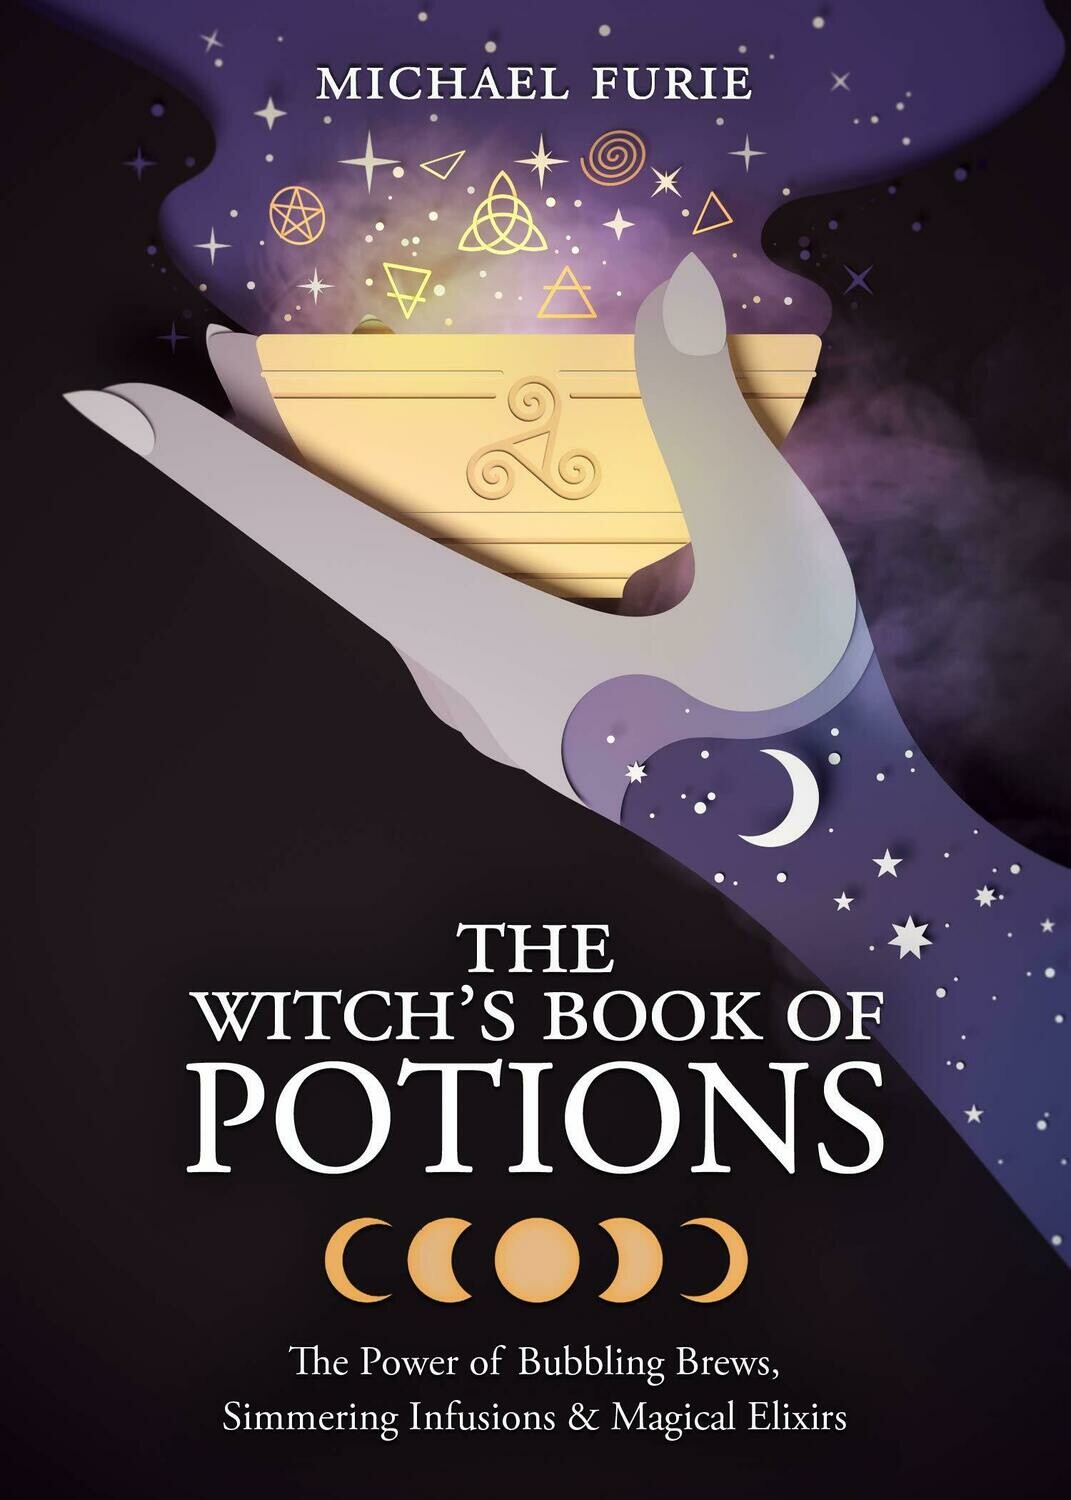 The Witch's Book of Potions by Michael Furie